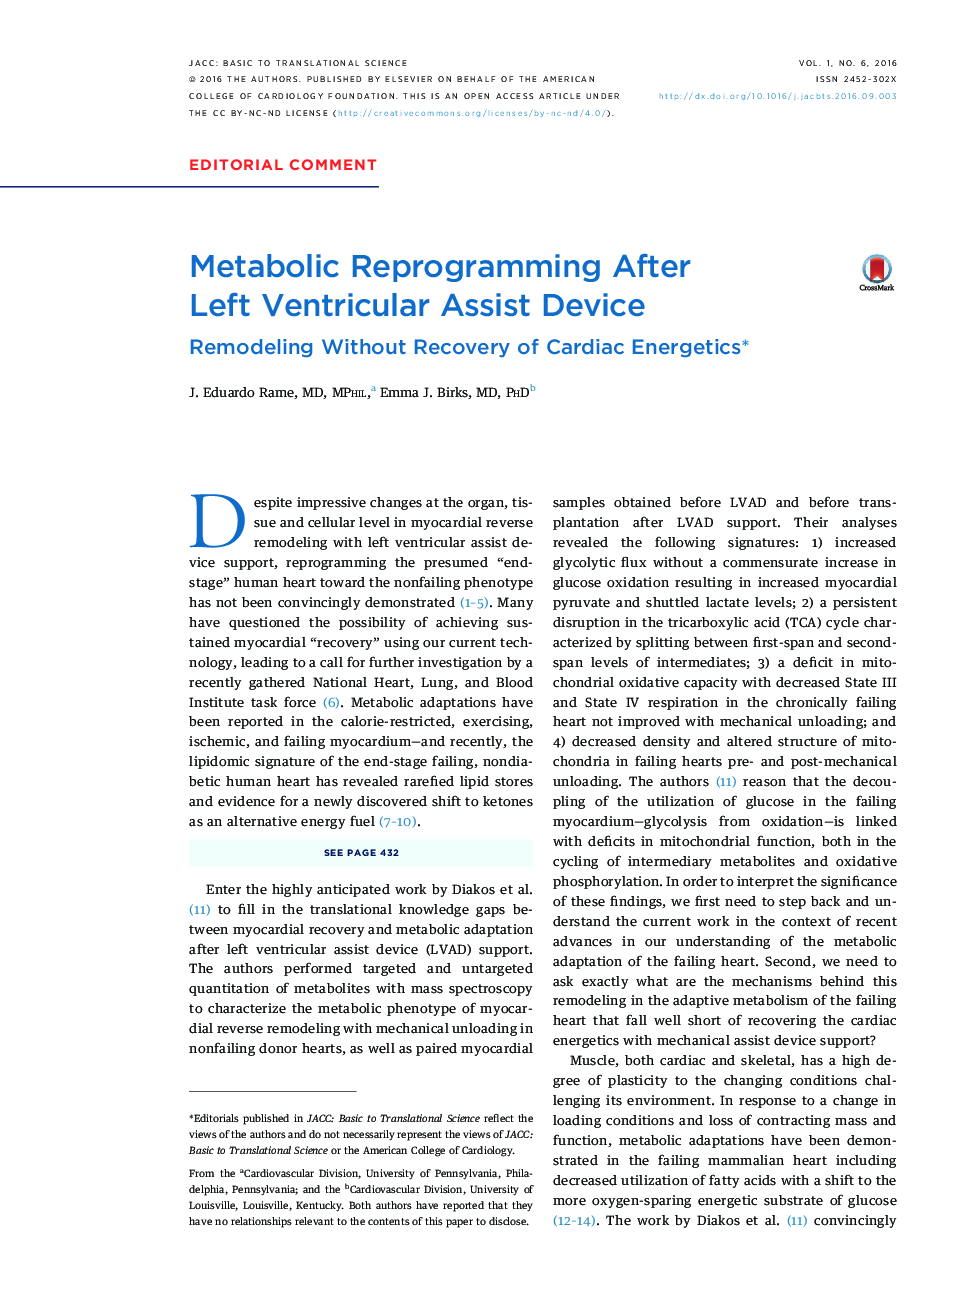 Metabolic Reprogramming After LeftÂ Ventricular Assist Device